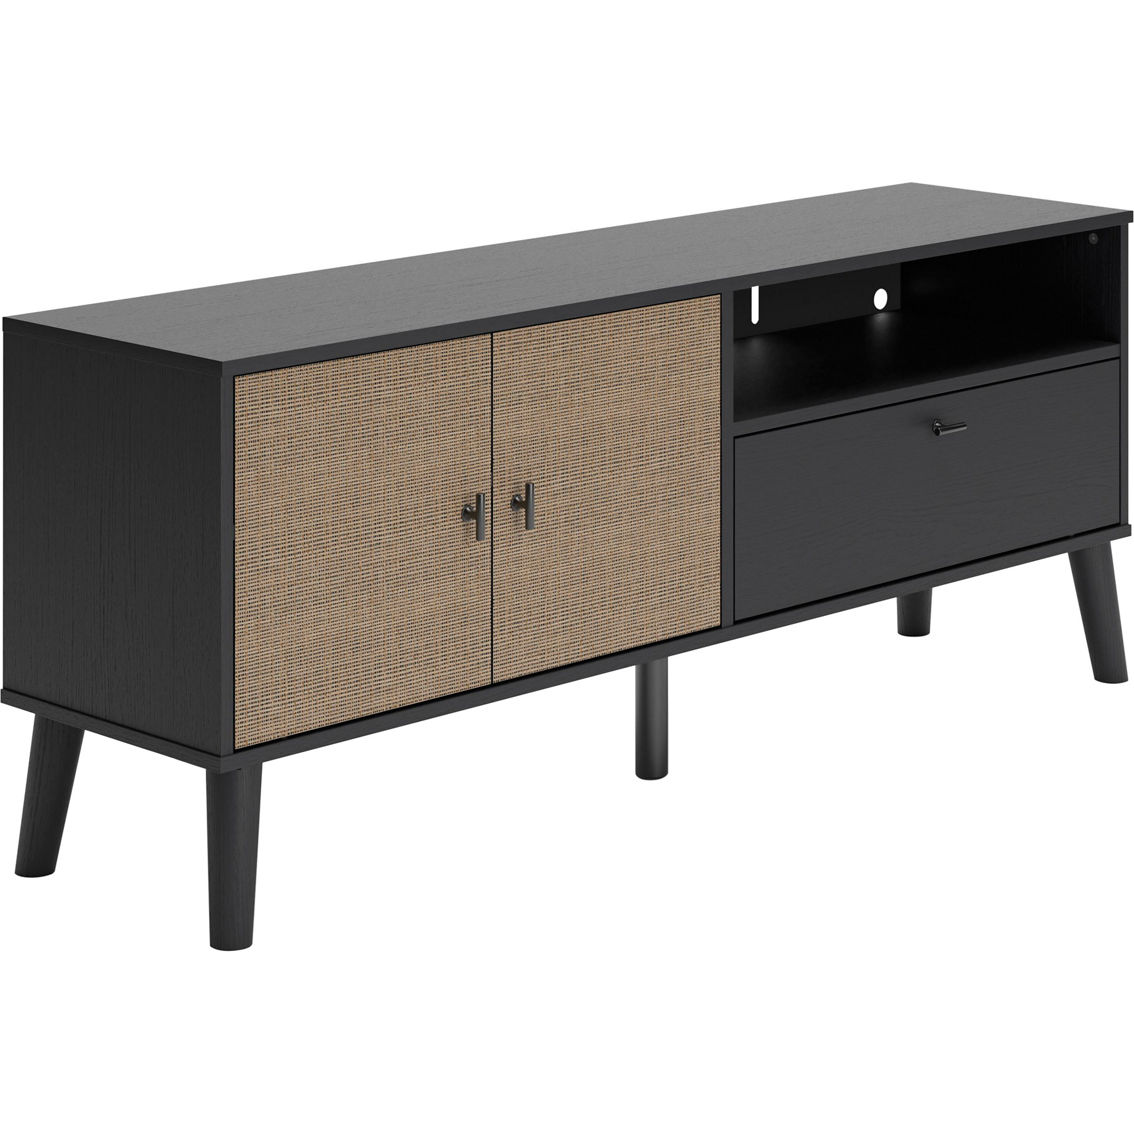 Signature Design by Ashley Charlang Ready-To-Assemble 59 in. TV Stand - Image 3 of 6